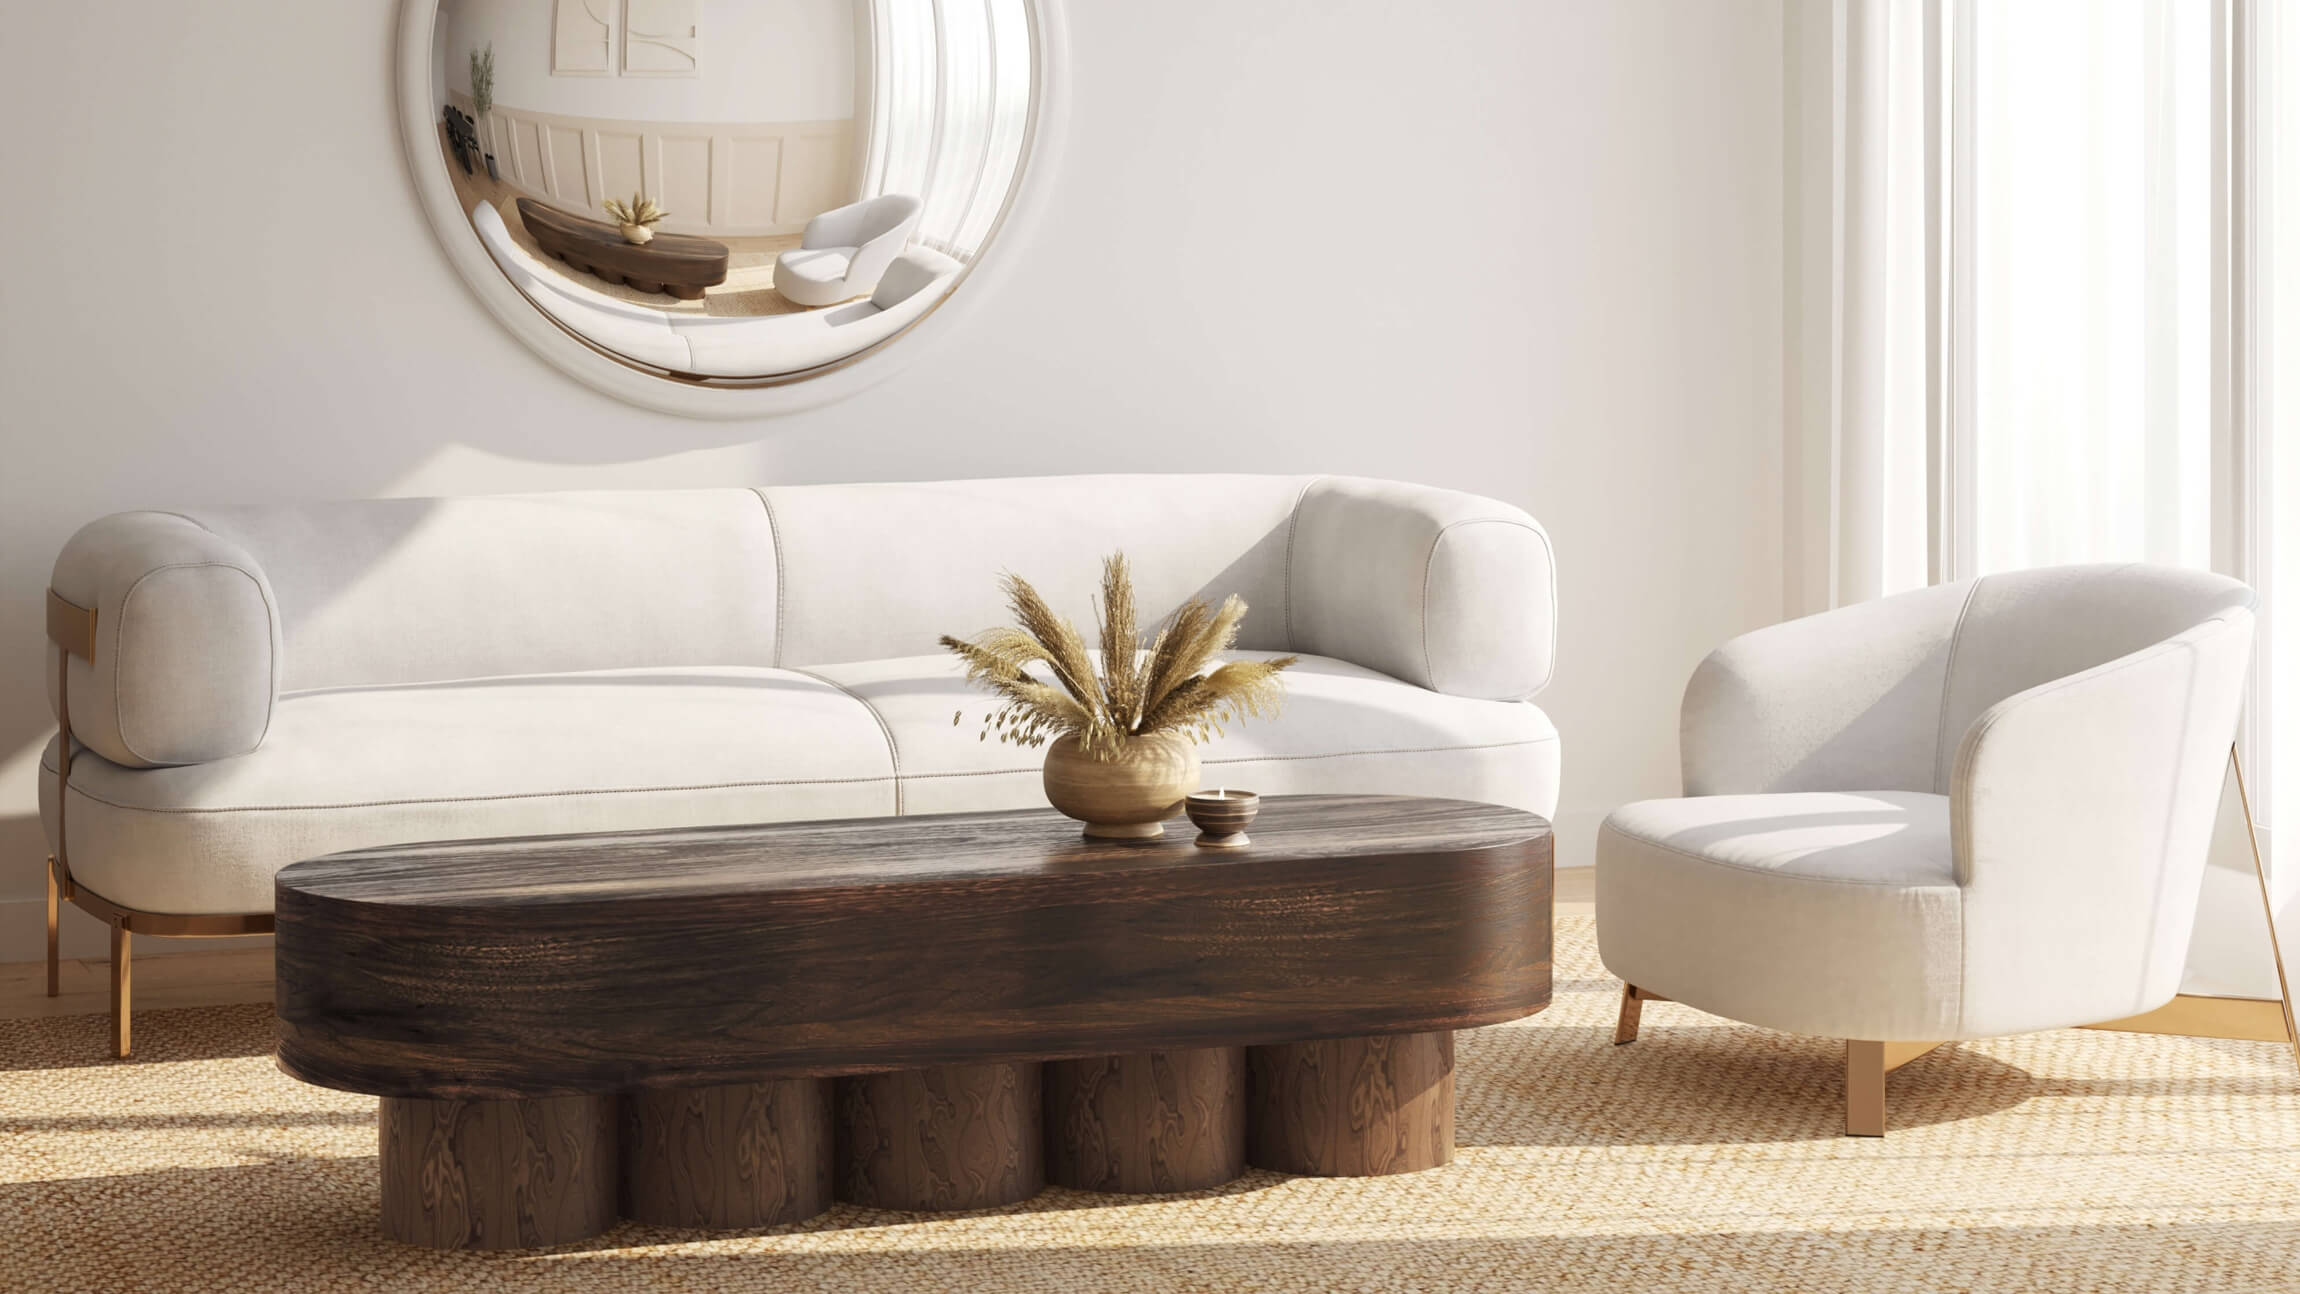 3D Rendering of a Stylish Wooden Coffee Table